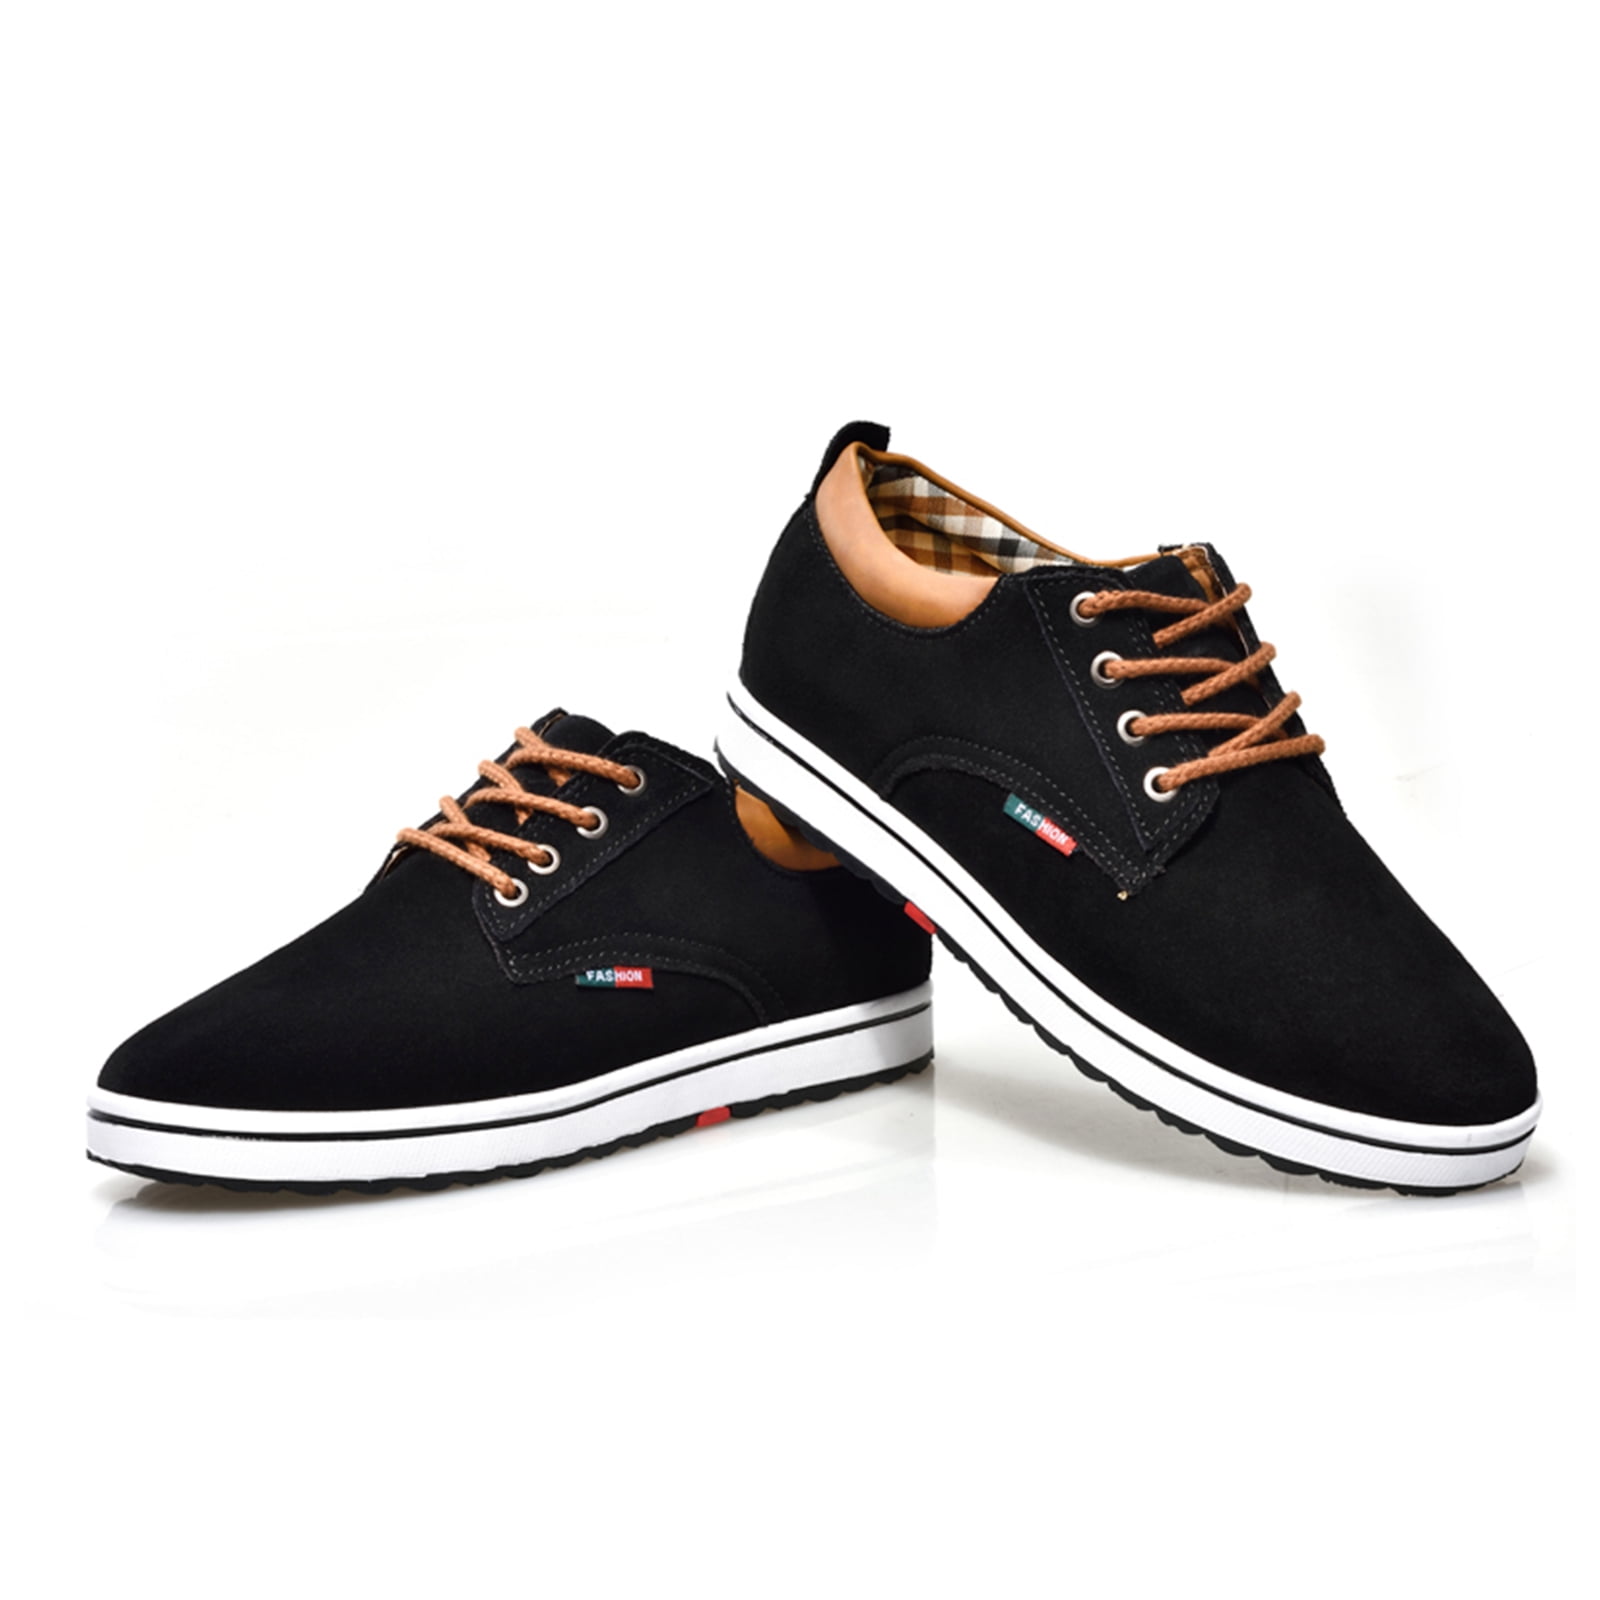 Cyiecw Men's Height Increasing Elevator Shoes Lace-up Fashion Casual 2.36 Inches Taller - Walmart.com